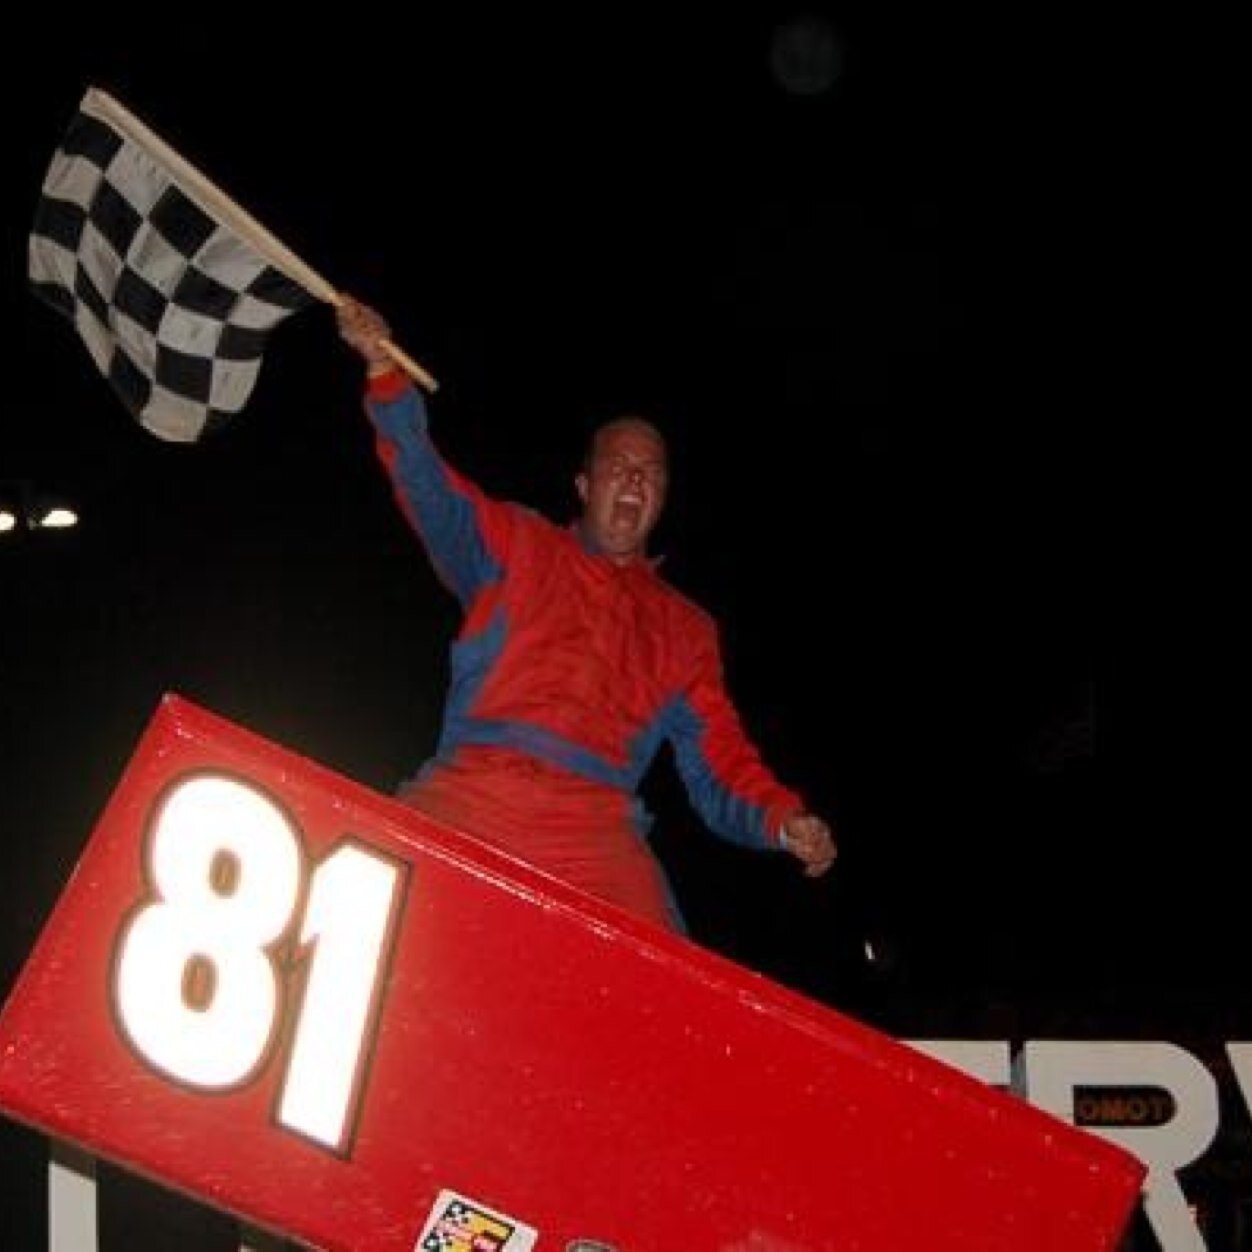 Driver of the No. 81 Simcox Grinding & Steel sprint car. Husband of Tara. Proud father of Rayce, Jett and Dash.